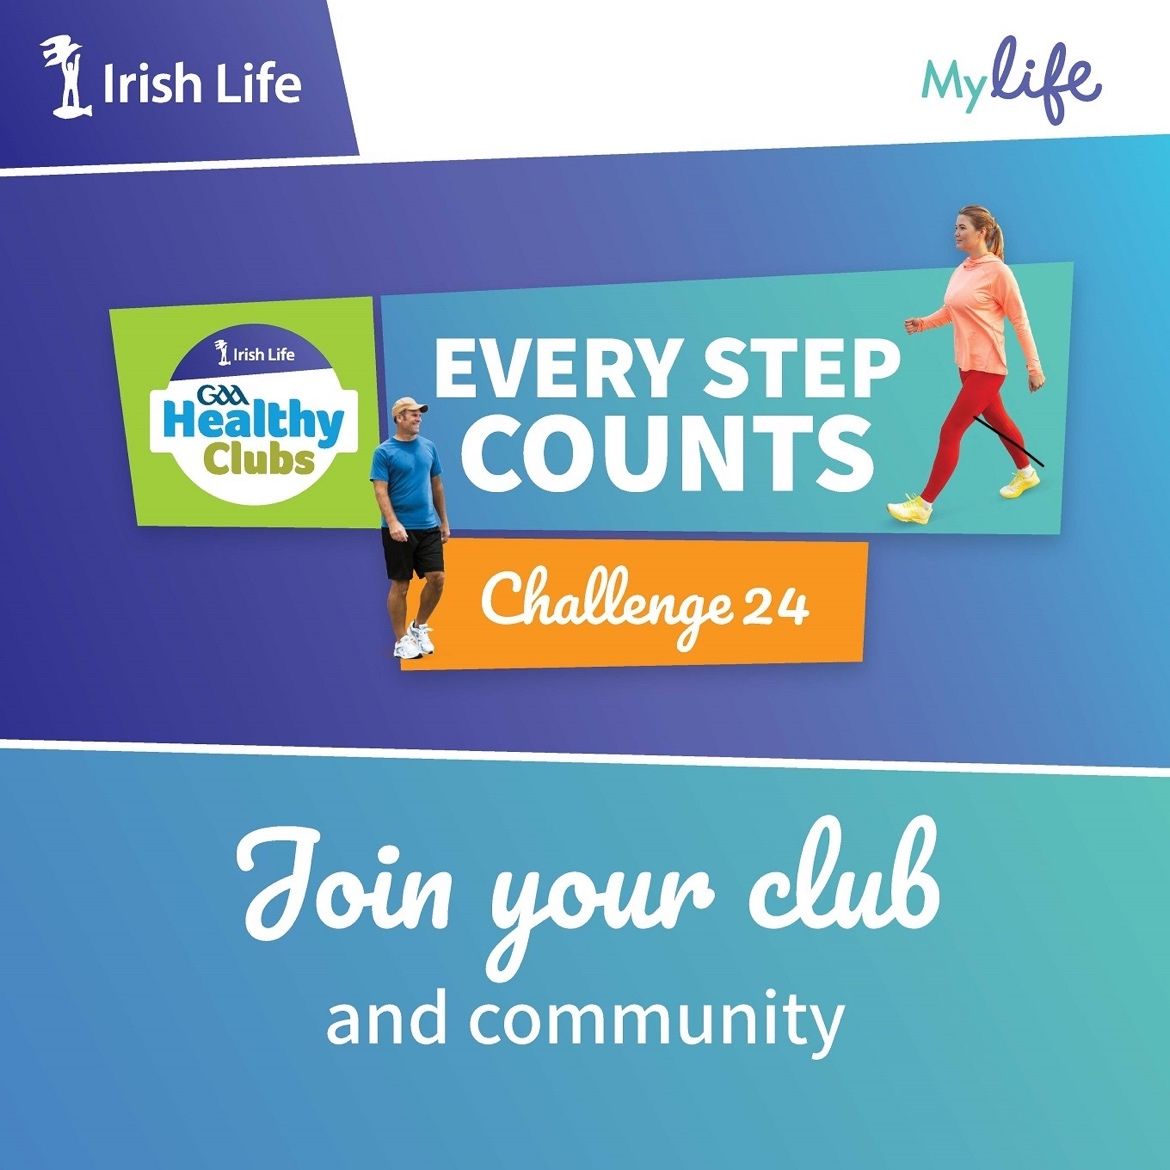 Join the 2024 Irish Life @officialgaa Healthy Clubs Challenge! With over 970 clubs already registered find your club and join the fun! Download MyLife by Irish Life for free and start walking with Every Step Counts ➡ mylife.irishlife.ie/every-step-cou… #GAA #MyLife